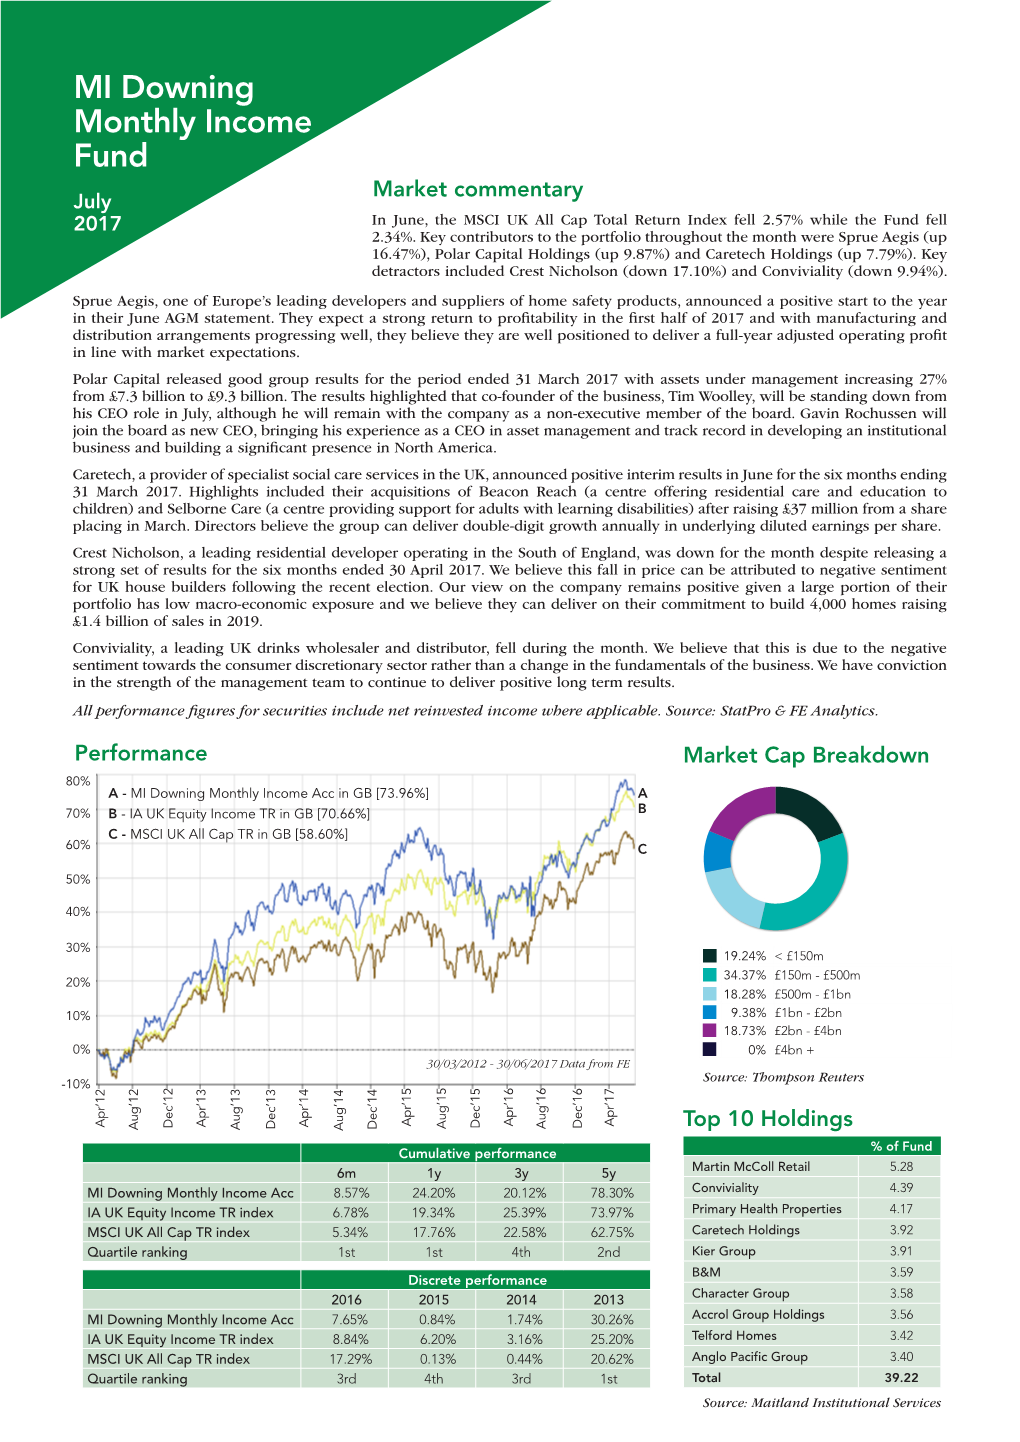 MI Downing Monthly Income Fund Market Commentary July 2017 in June, the MSCI UK All Cap Total Return Index Fell 2.57% While the Fund Fell 2.34%